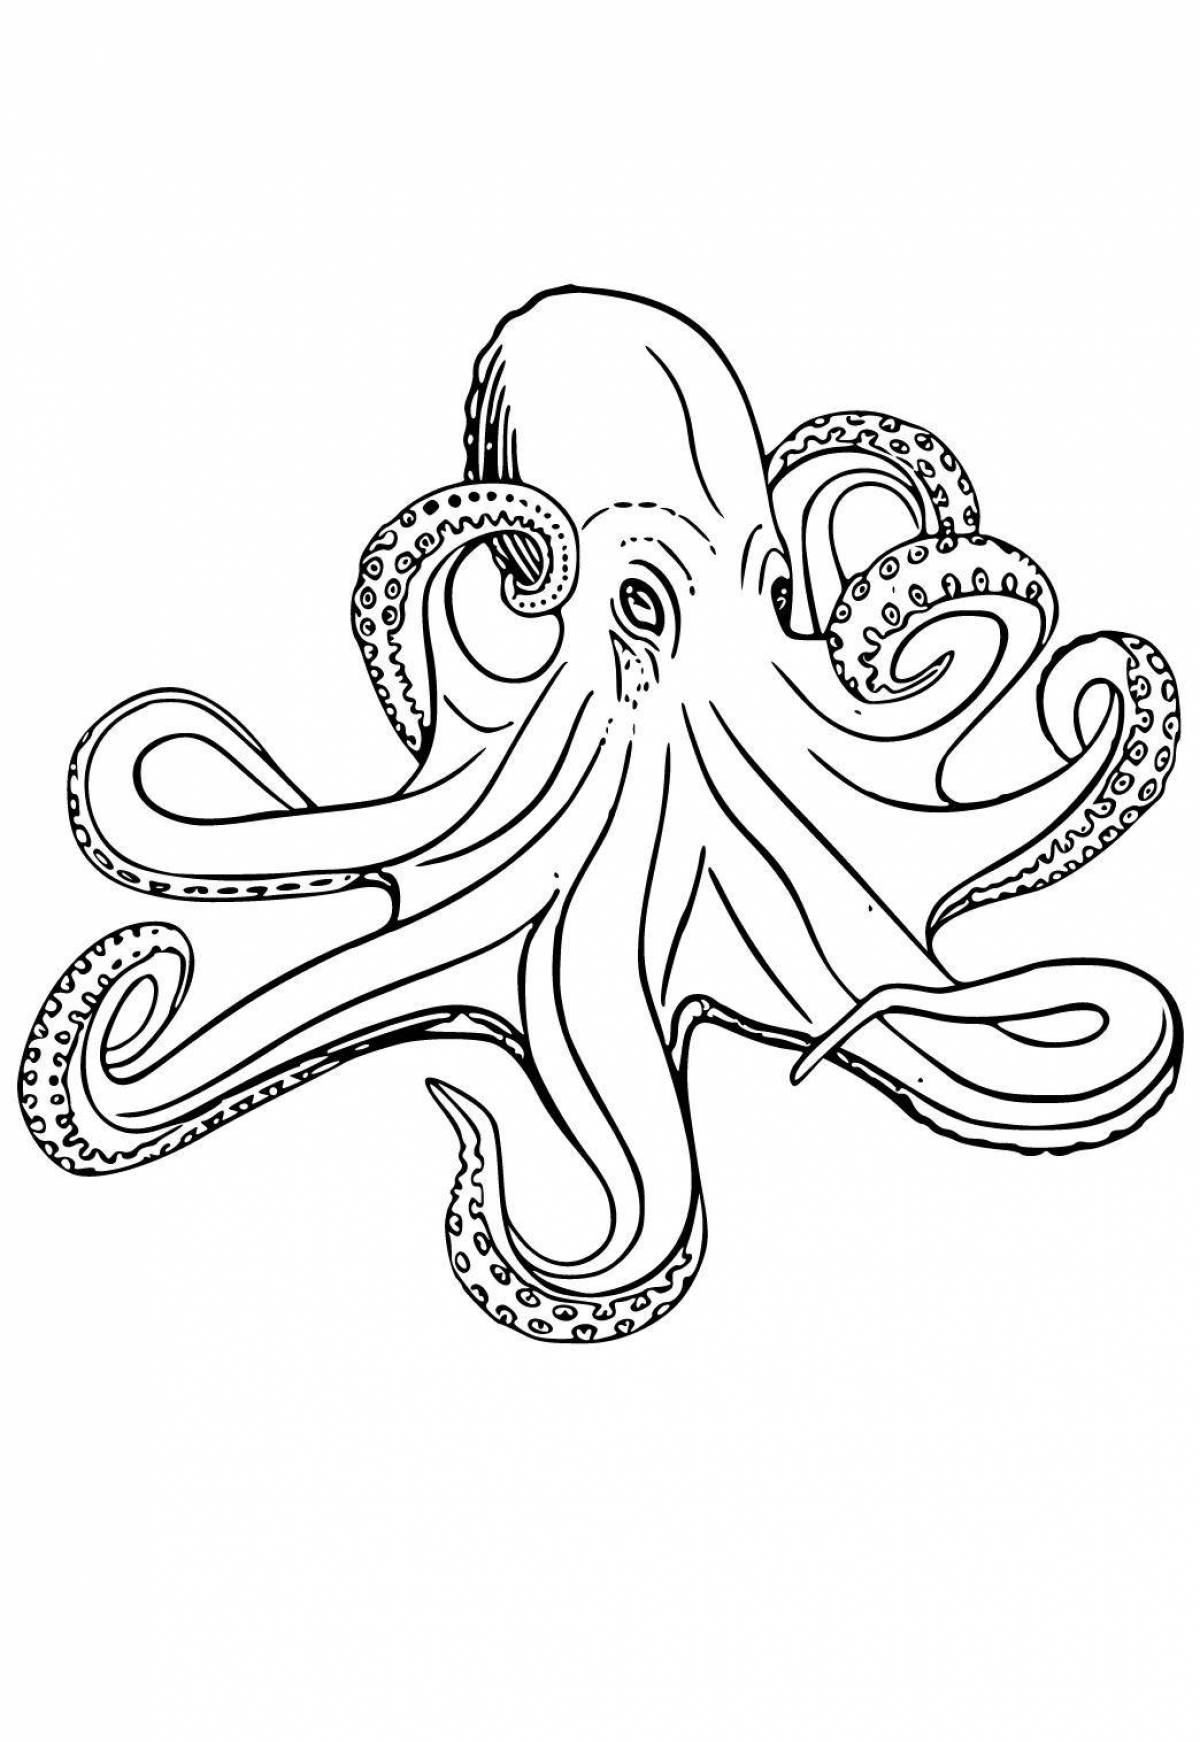 Magic coloring octopus changeling